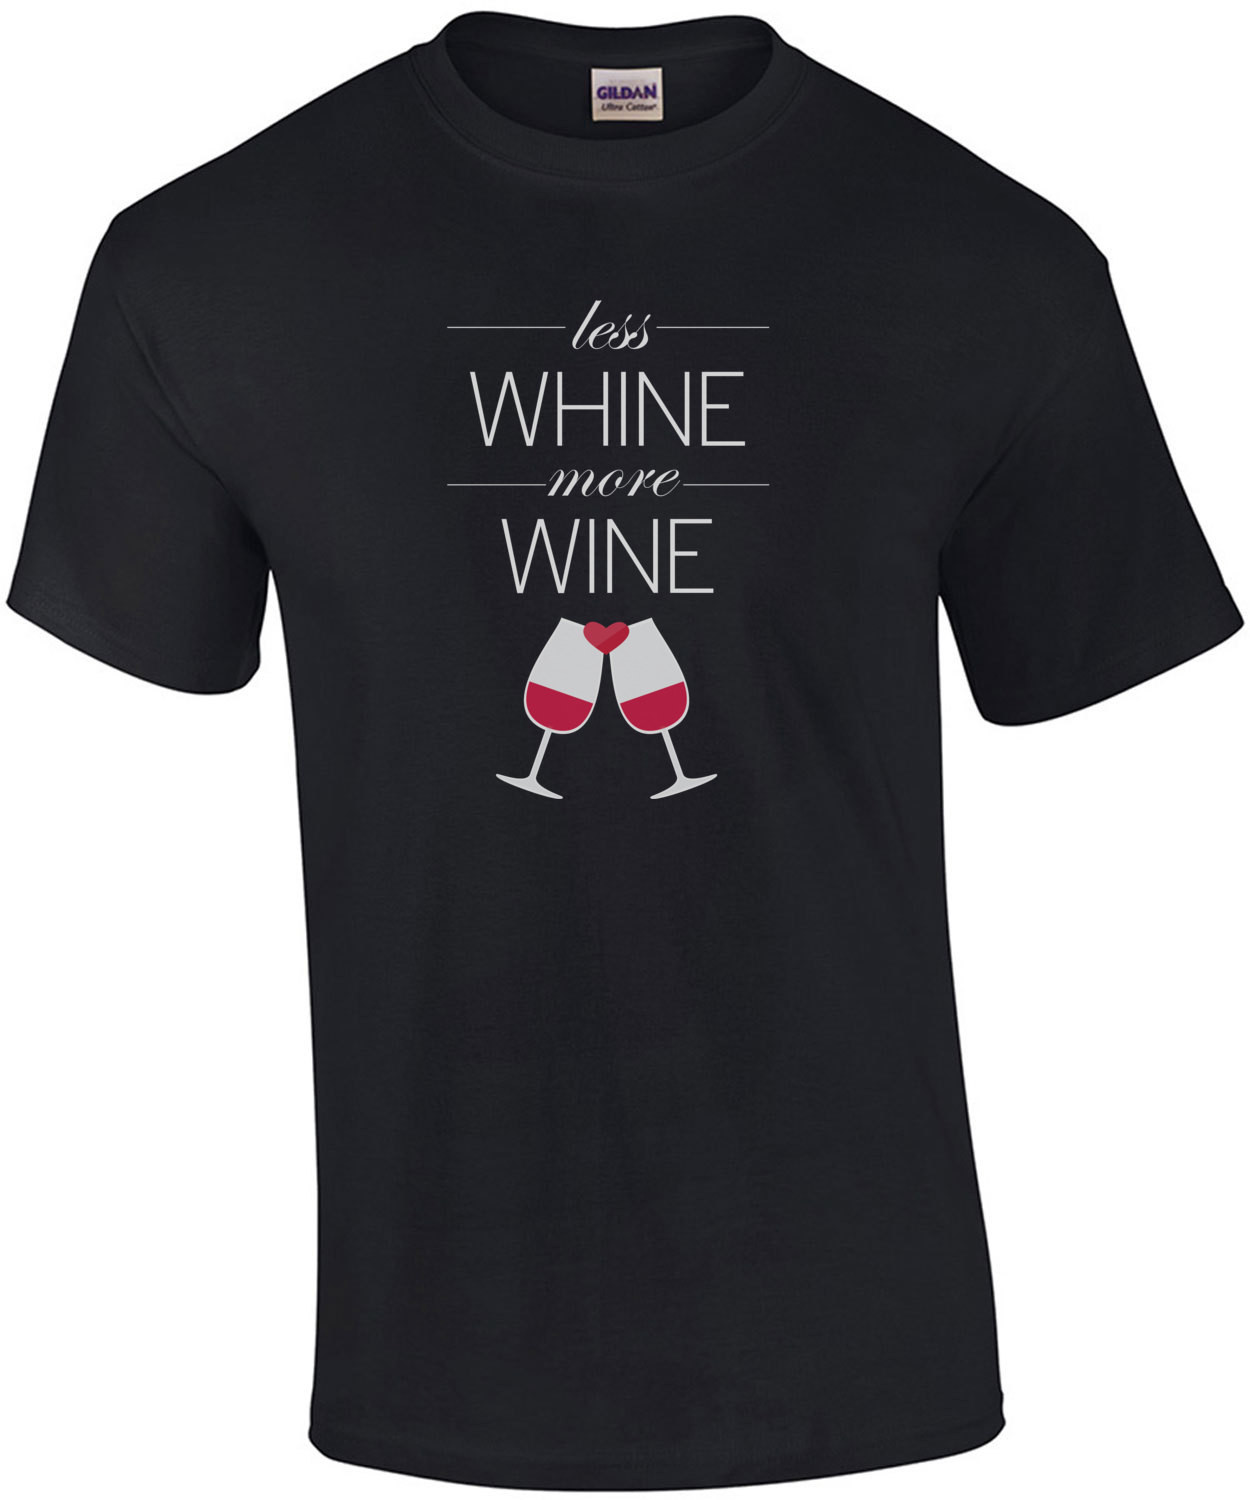 Less whine - more wine - funny wine